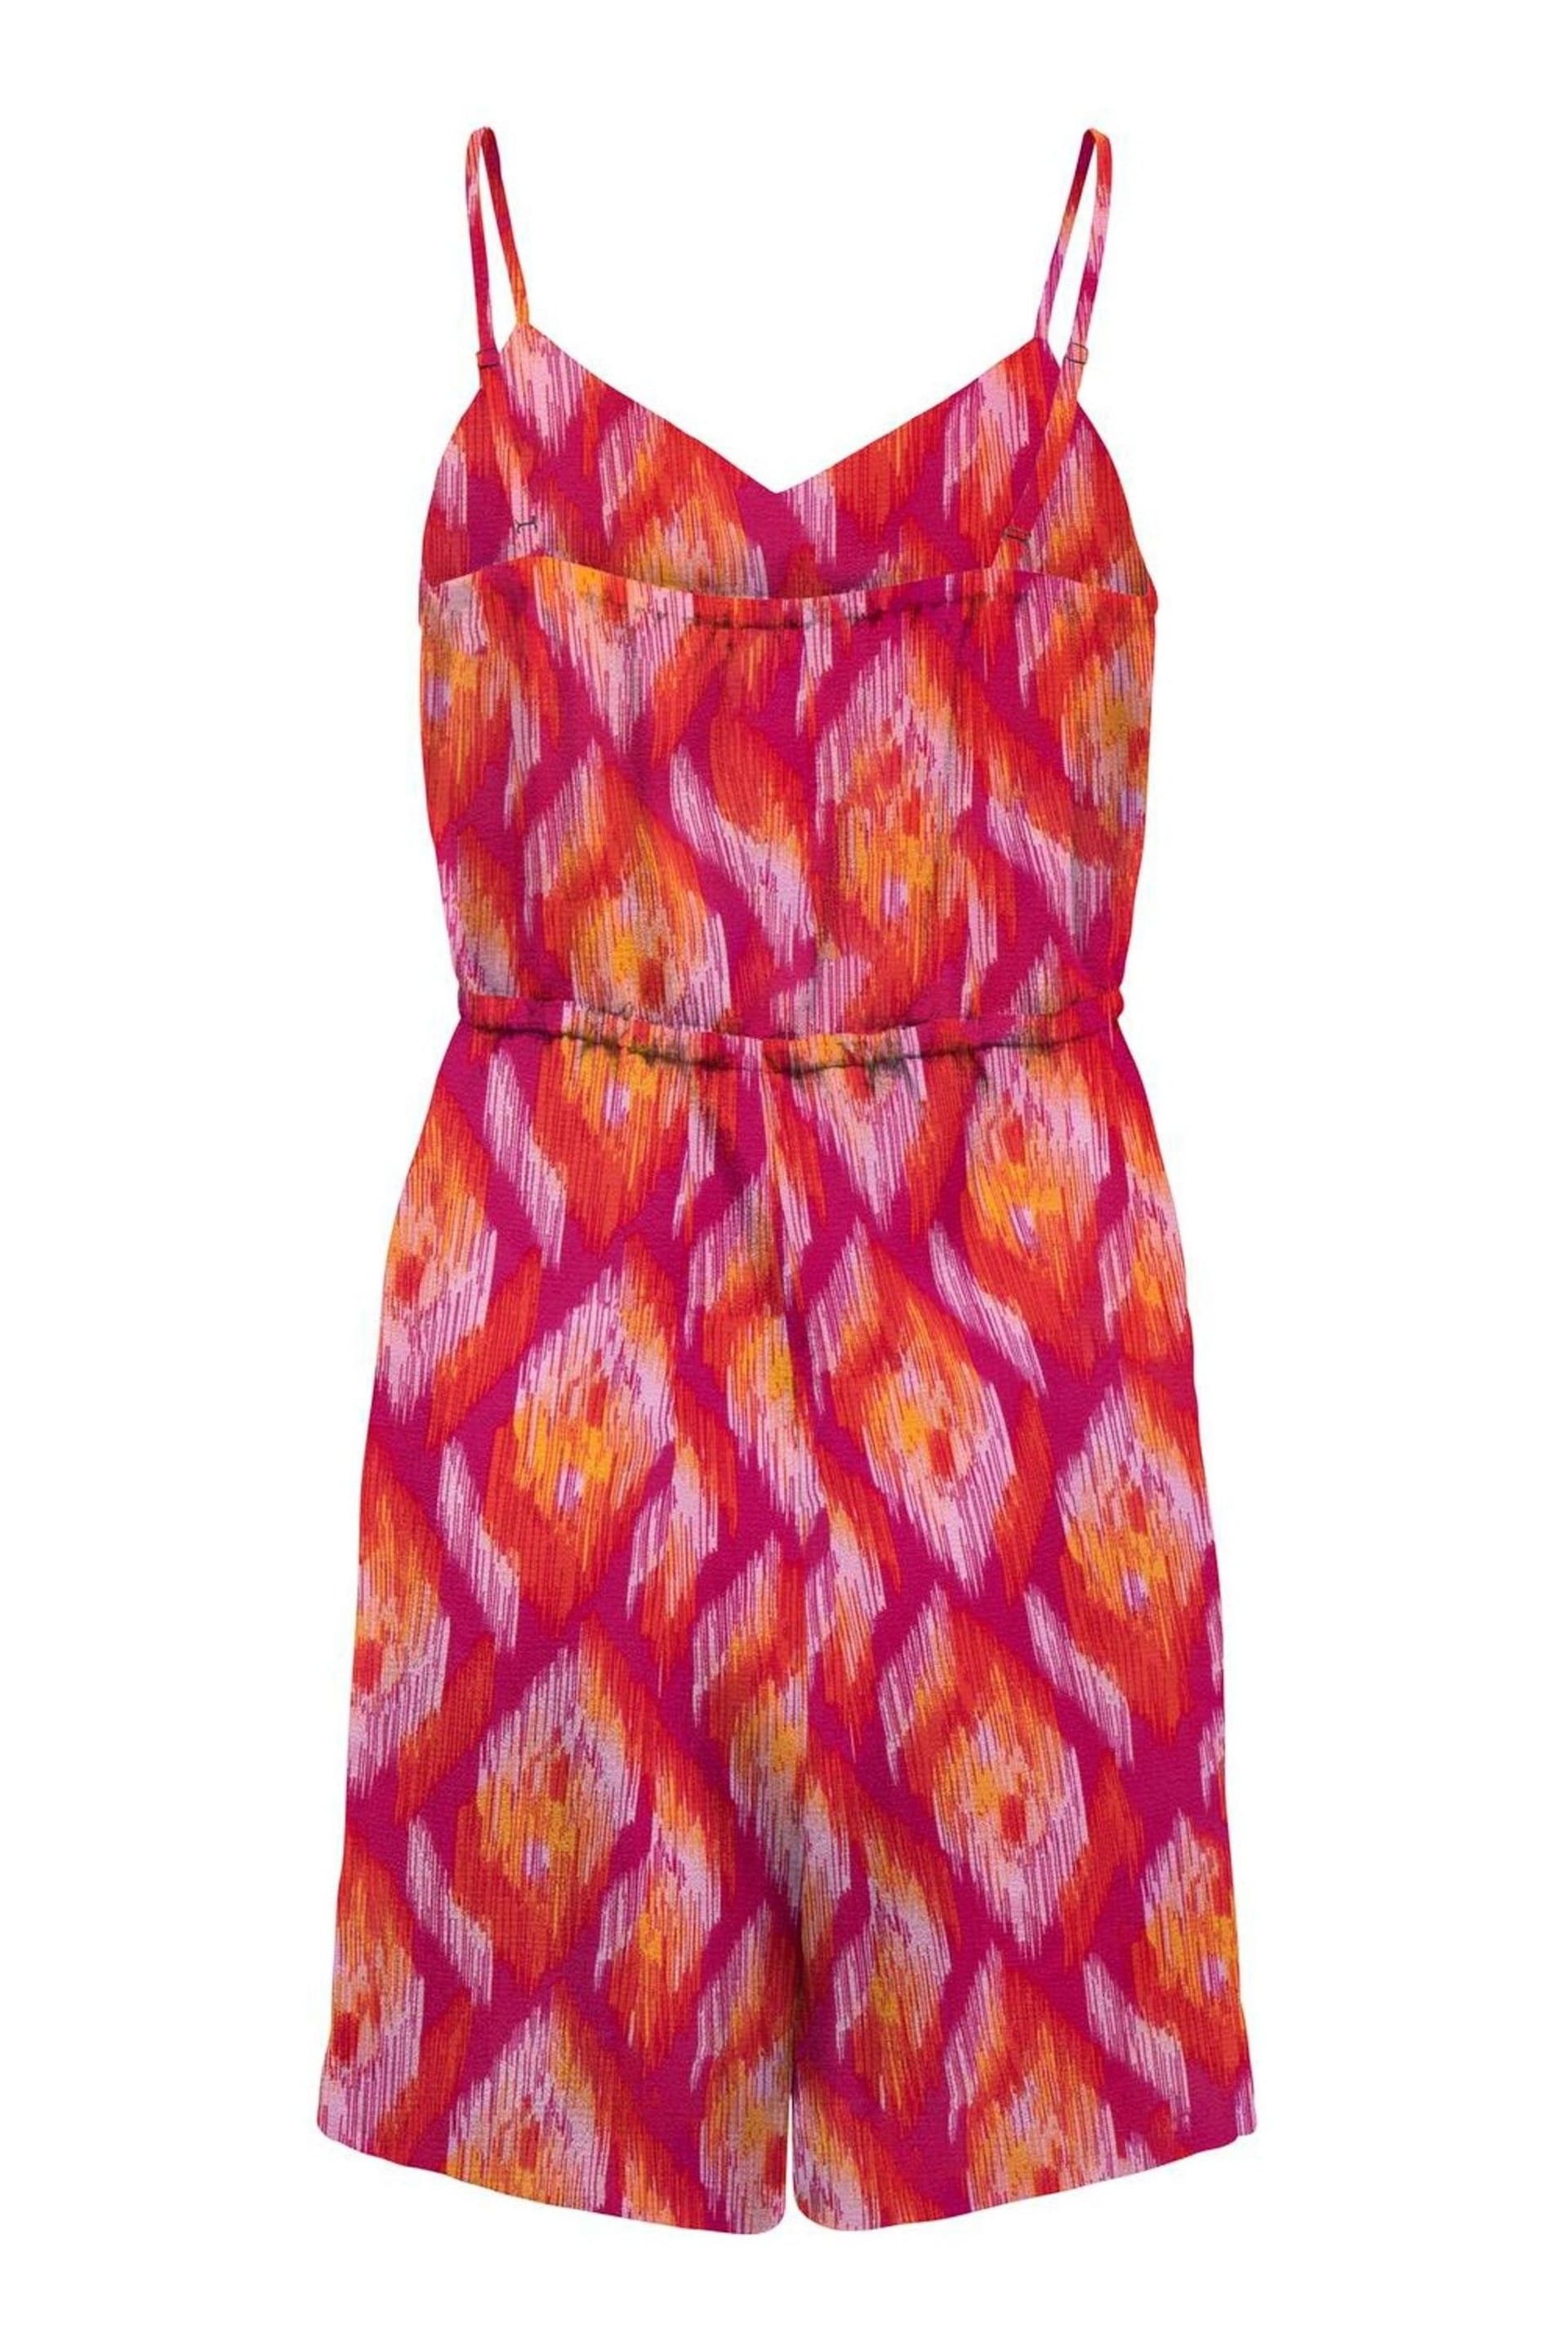 ONLY Purple Mosaic Print Ruffle Cami Playsuit - Image 4 of 4